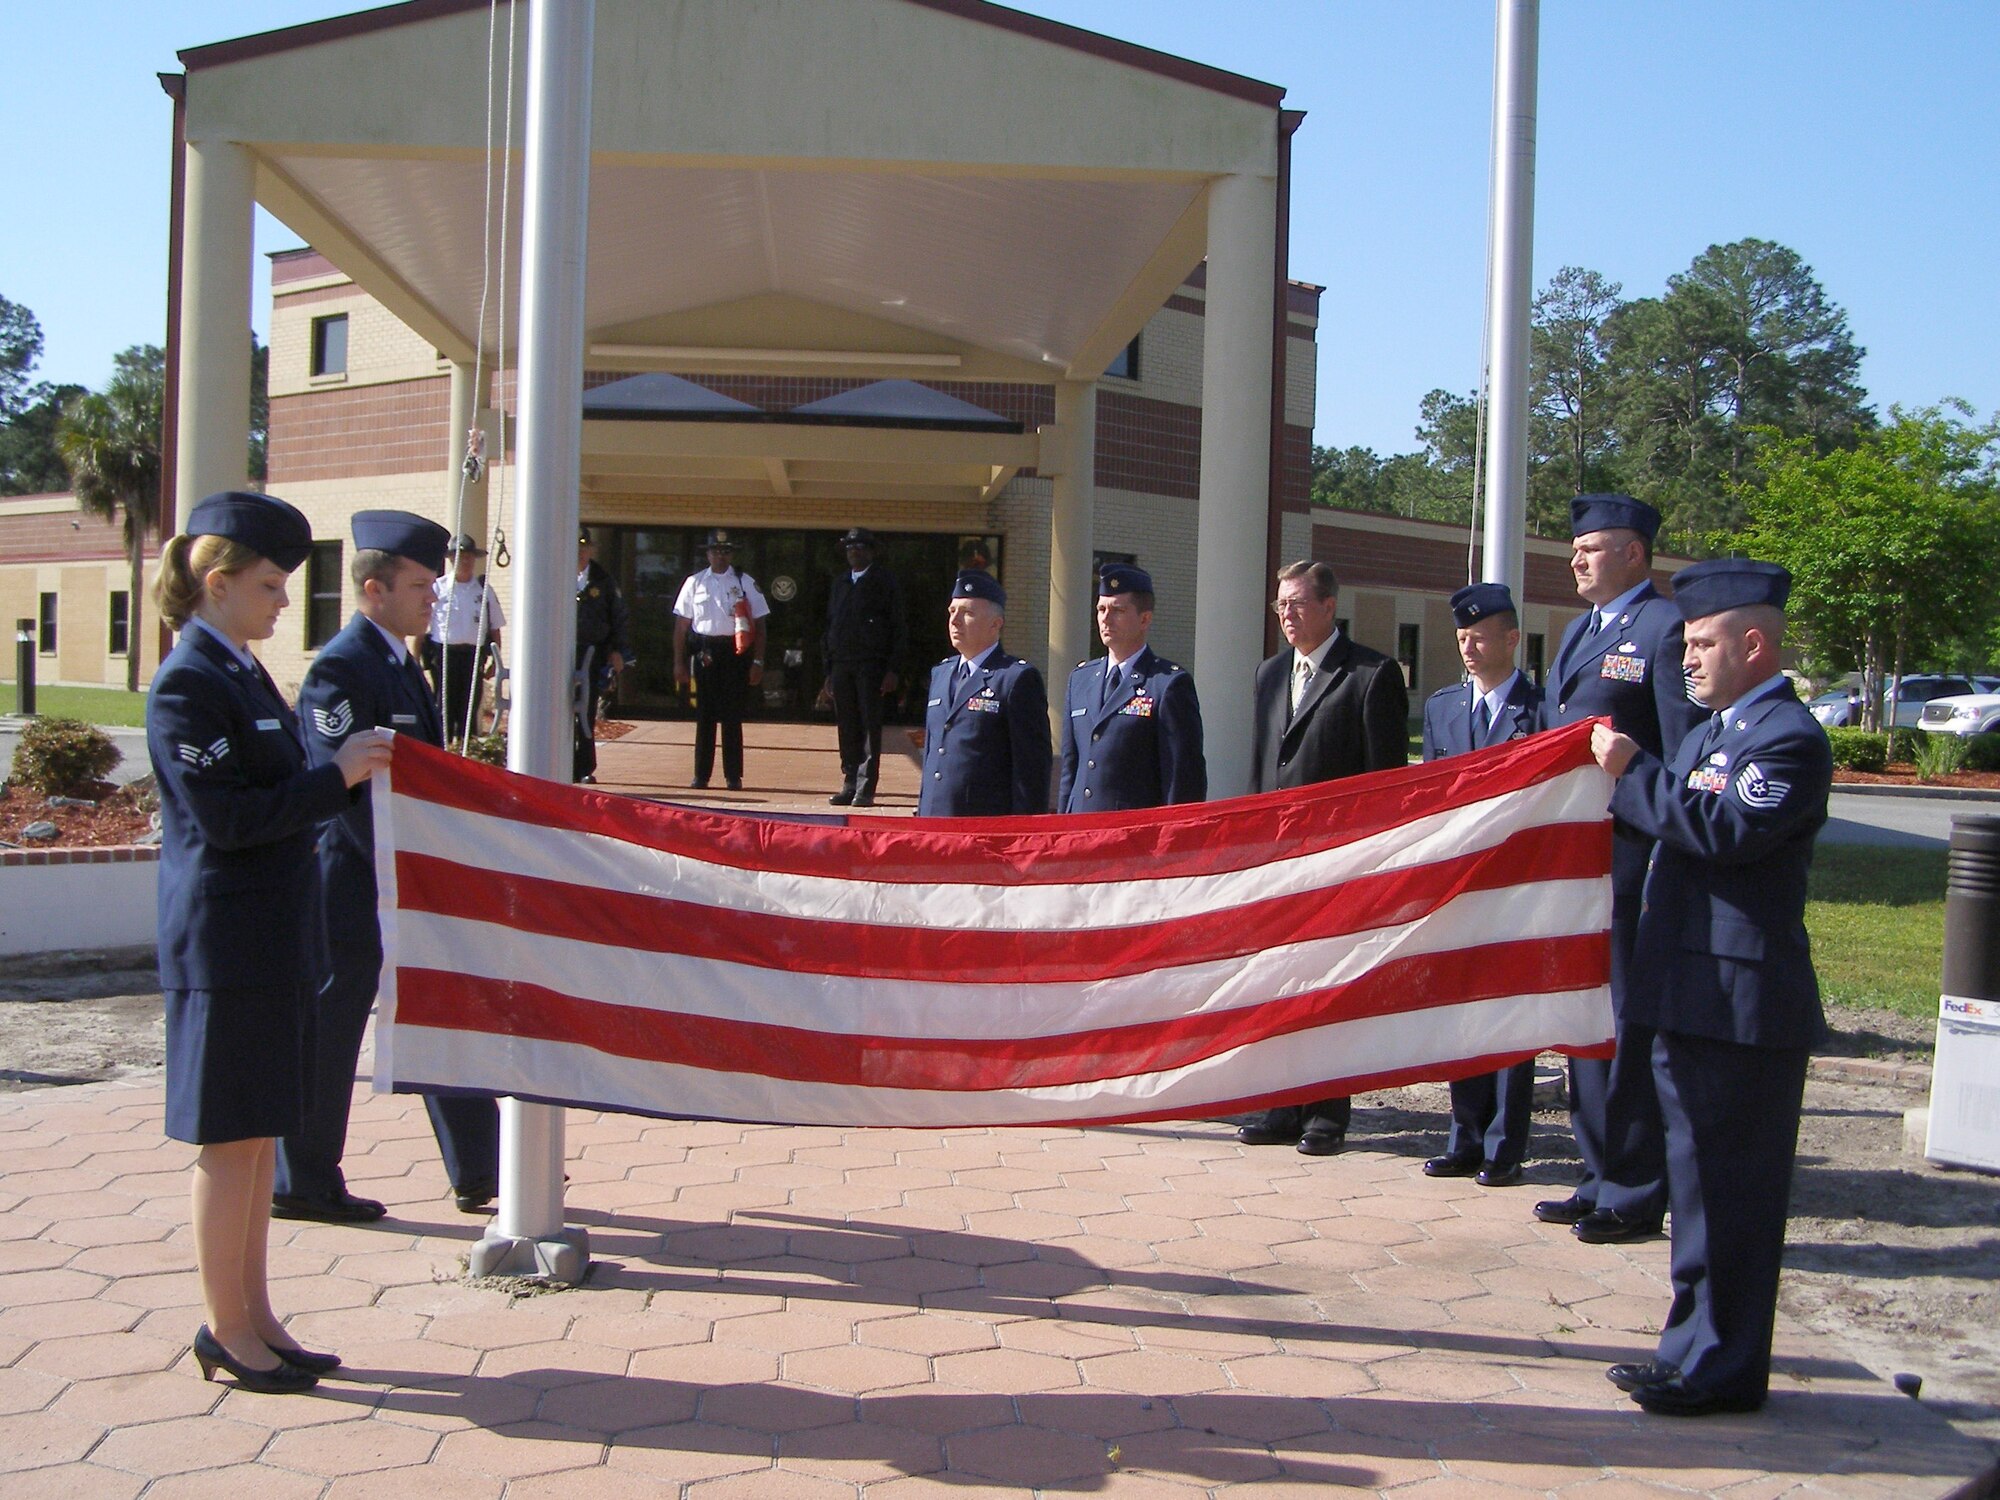 Instructors and staff of the United States Air Force Special Investigations Academy (USAFSIA) gathered at the headquarters building of the Federal Law Enforcement Training Center, Brunswick, Ga., April 14, to do their part for the Air Force Office of Special Investigation’s 60th Anniversary ceremony. Folding Flag: Left - SrA Sara McCoy, AFSIA IM; Right - TSgt Charles Meore; NCOIC, AFSIA/CSS; At Flag Pole:  TSgt Phillip Santomauro, Instructor, AFSIA Basic Division. In Rear from Left to Right:  Lt Col Nicholas Mattia, IMA to AFSIA/CC; Major Keith Crook FSC/Instructor; Mr. Jeffrey Thompson, Director, AFSIA Advanced Division; Capt. Brent Heckel, Director, AFSIA Basic Division; CMSgt Walker Cottingham AFSIA Superintendent. (Courtesy photo)